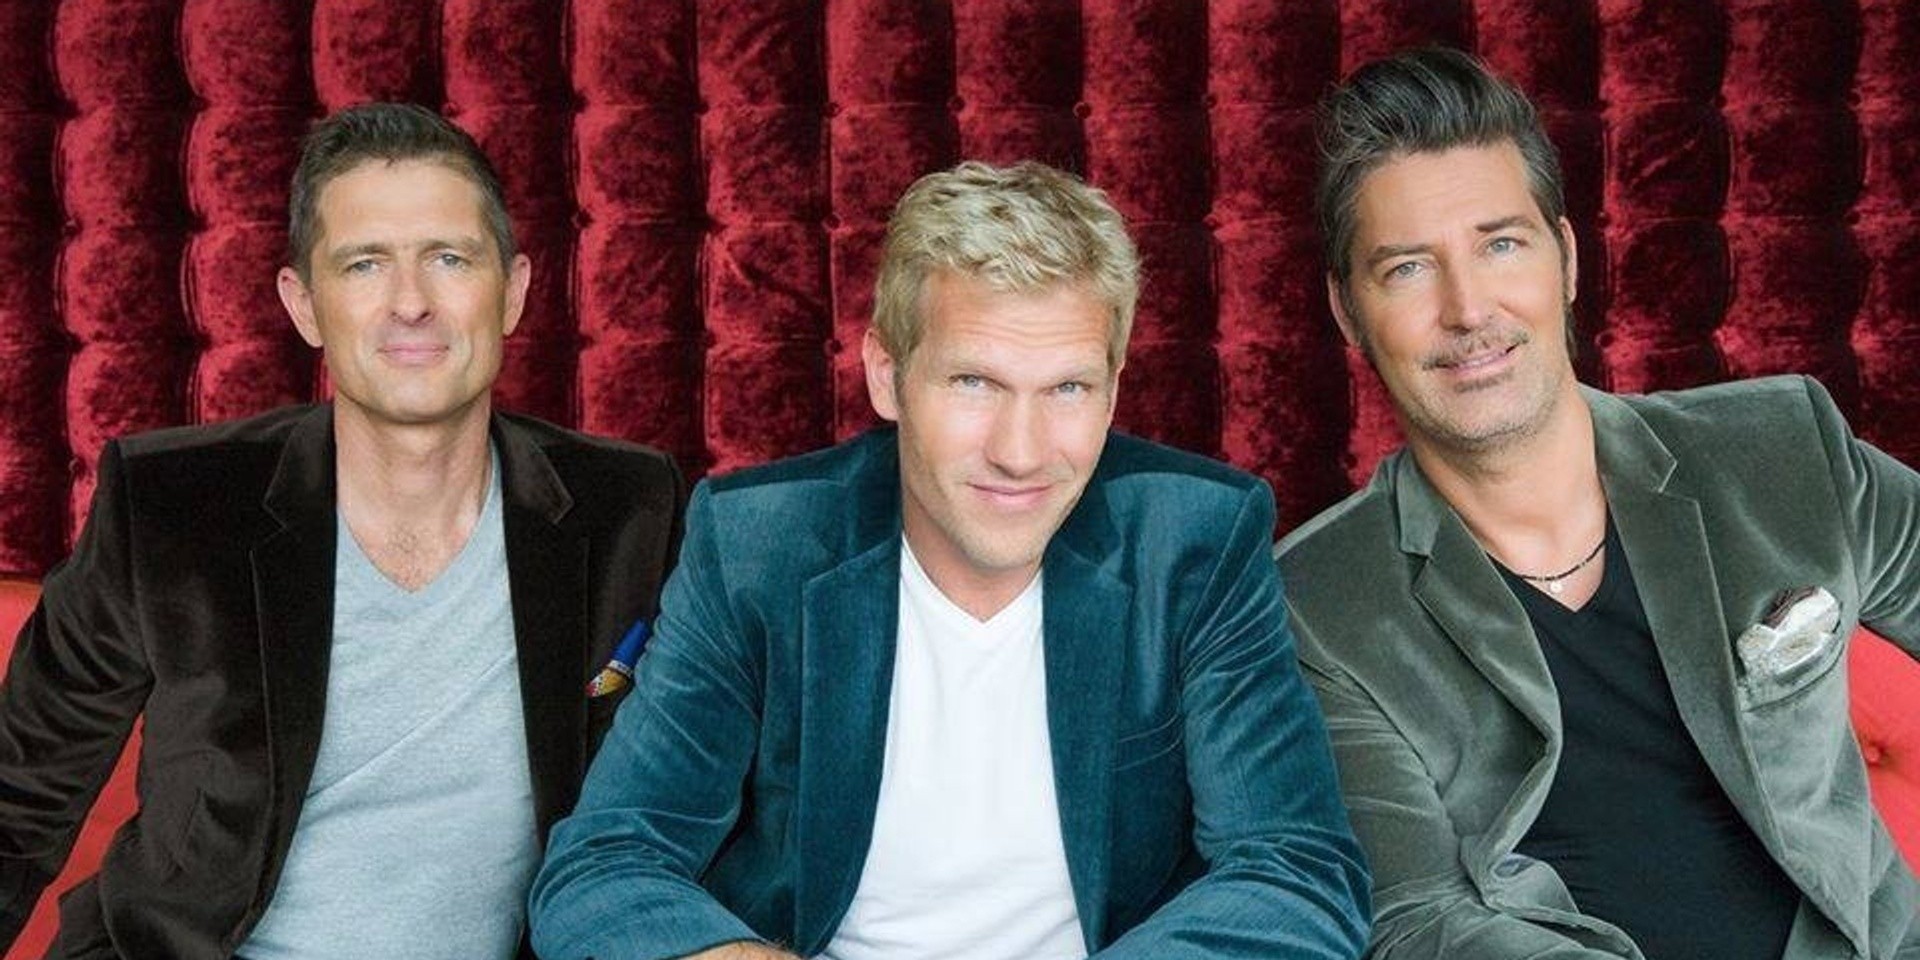 Michael Learns to Rock are coming back to Singapore 